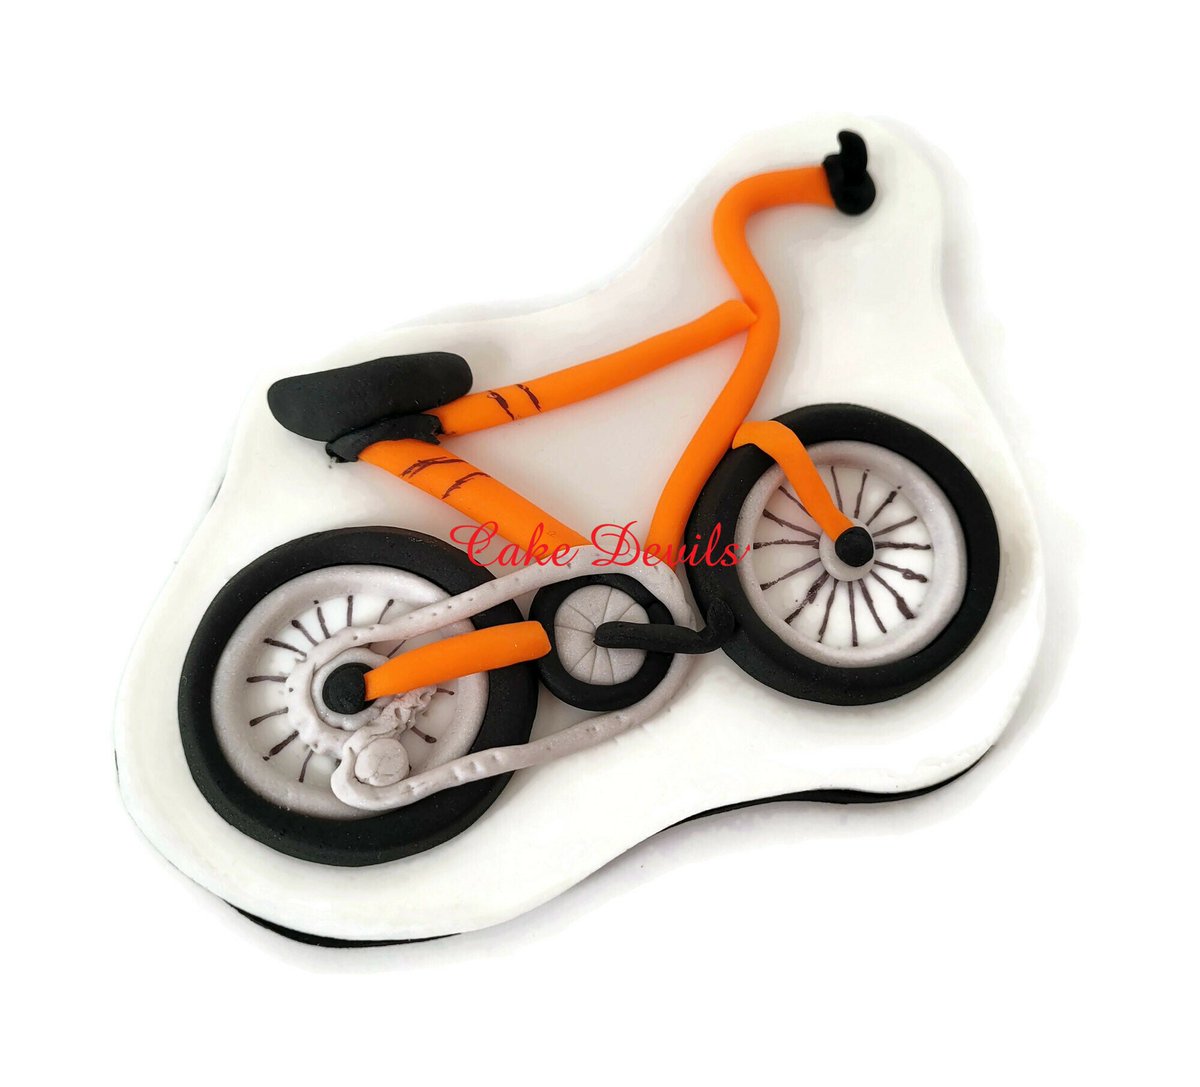 Bicycle Cake, Fondant Bike Cake Topper, Handmade cyclist Cake Decoration, Biker themed birthday party 
Find it here etsy.com/listing/129164…
^^^Click the link above to learn more!^^^
#TransportationCake #CakeDecorations